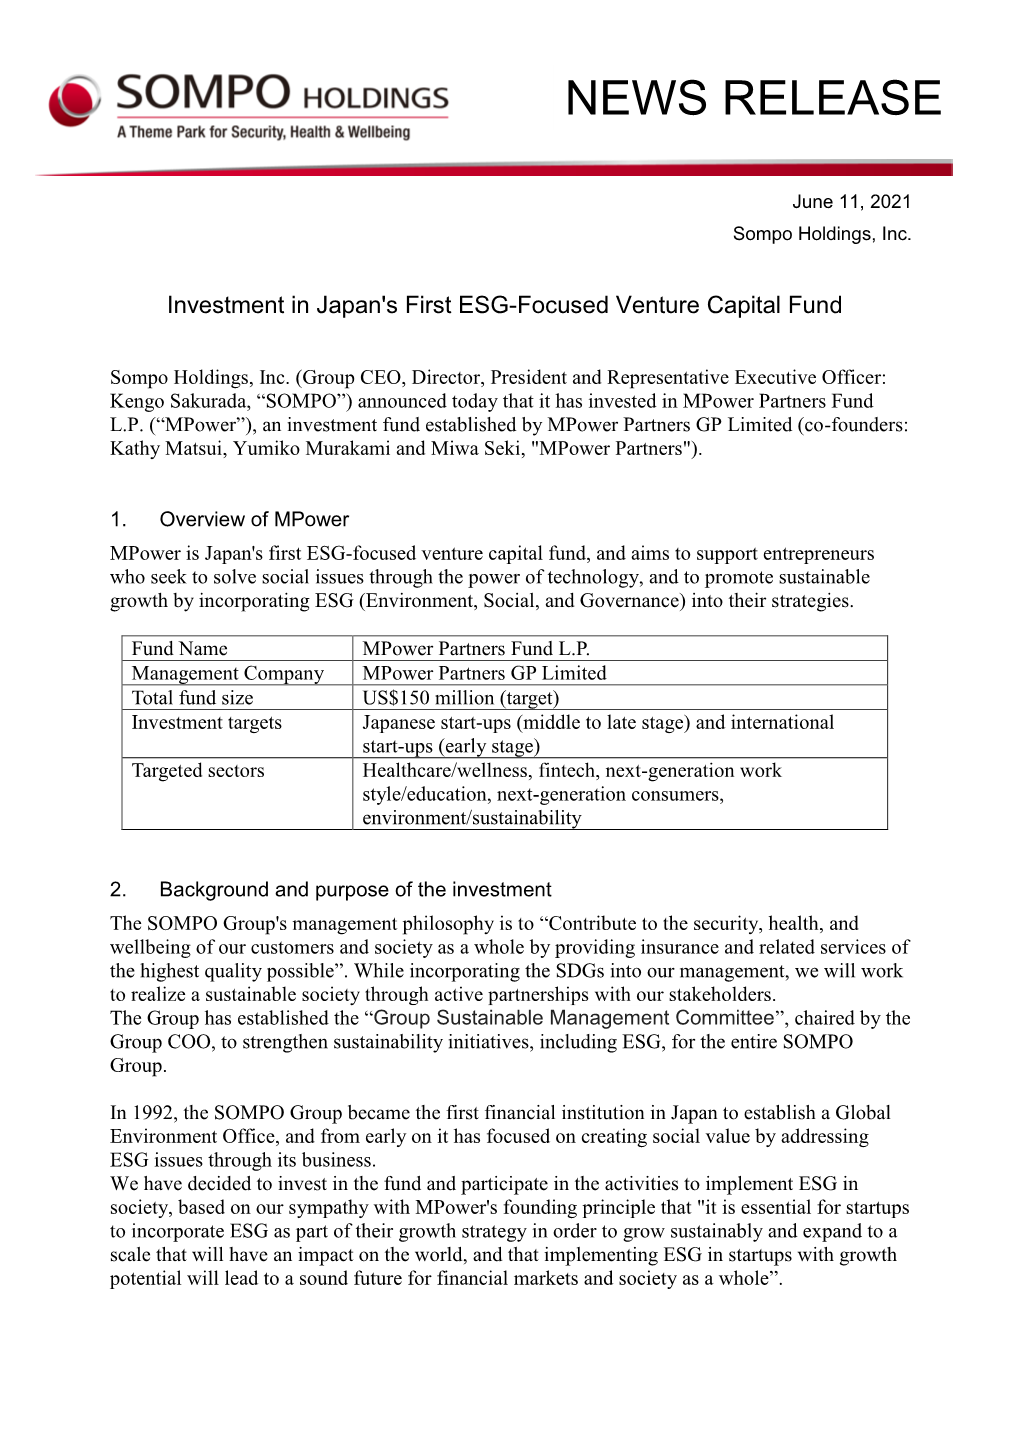 Investment in Japan's First ESG-Focused Venture Capital Fund